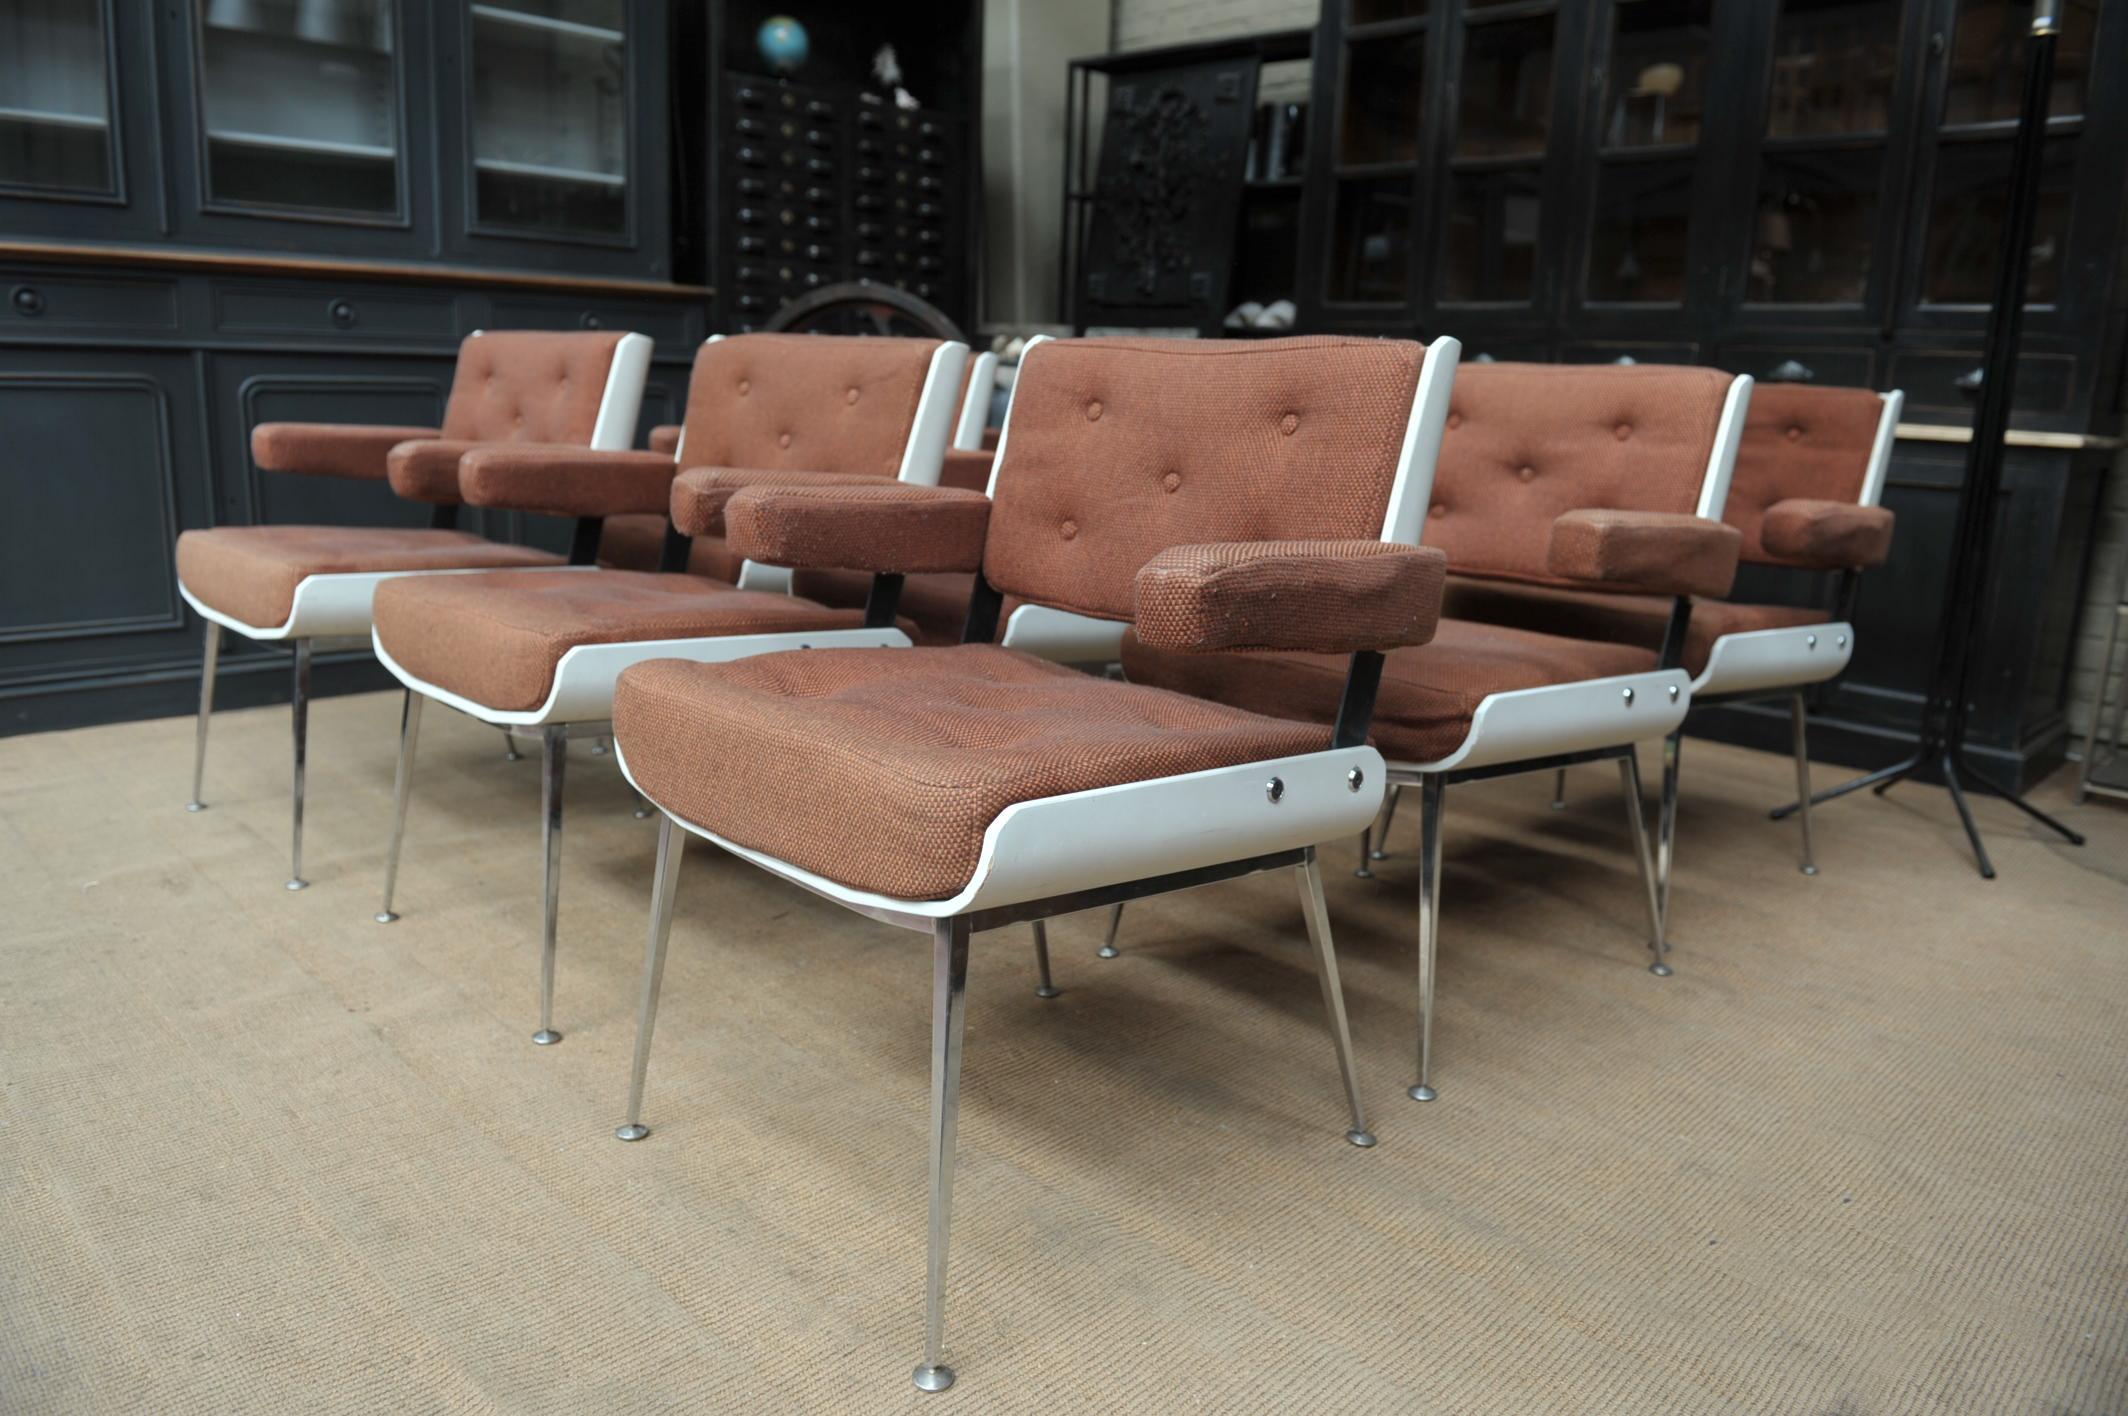 Armchairs by Alain Richard all original with lacquered plywood structure, métal feet and brown fabric, France, circa 1970 14 kg each.shipping for 1 pieces ( 490 $ for USA )  thanks to send city code  and number and number of chairs to have a exact